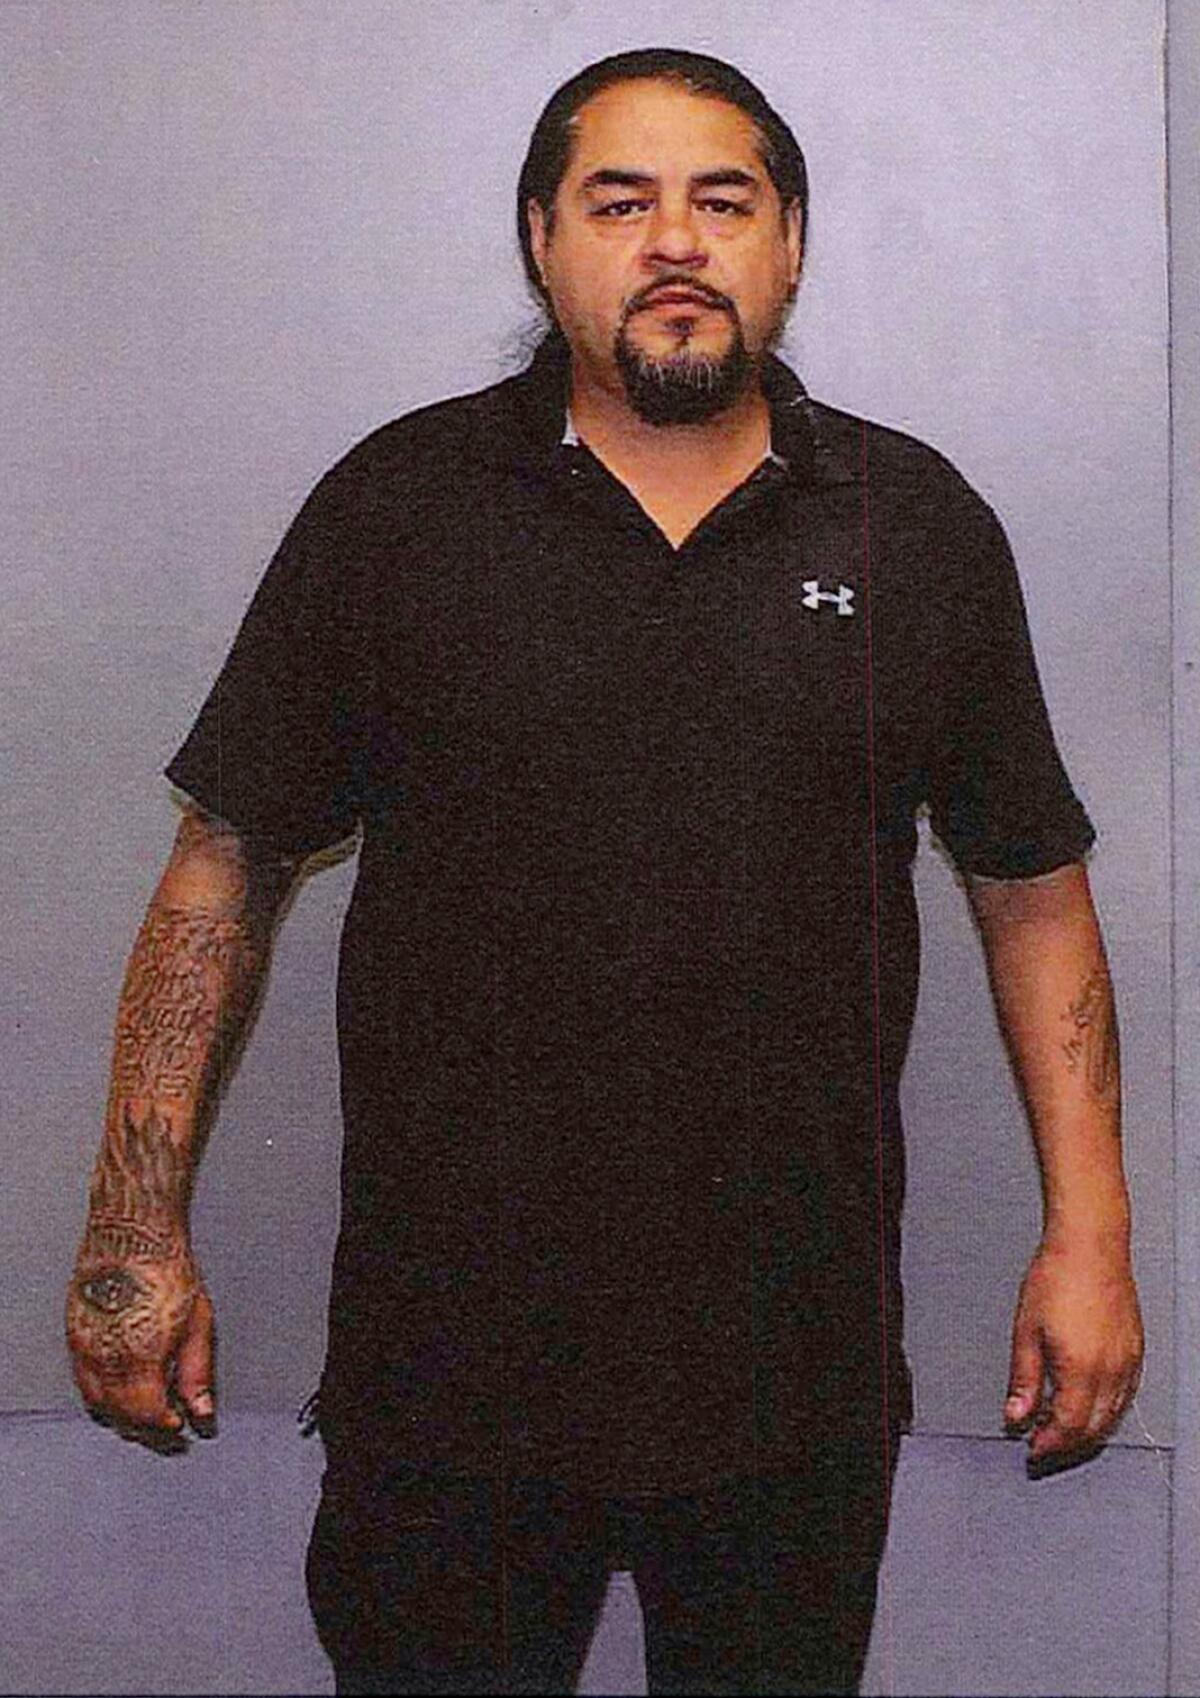  A man in work clothes with tattoos on his forearms stands before a blank background.